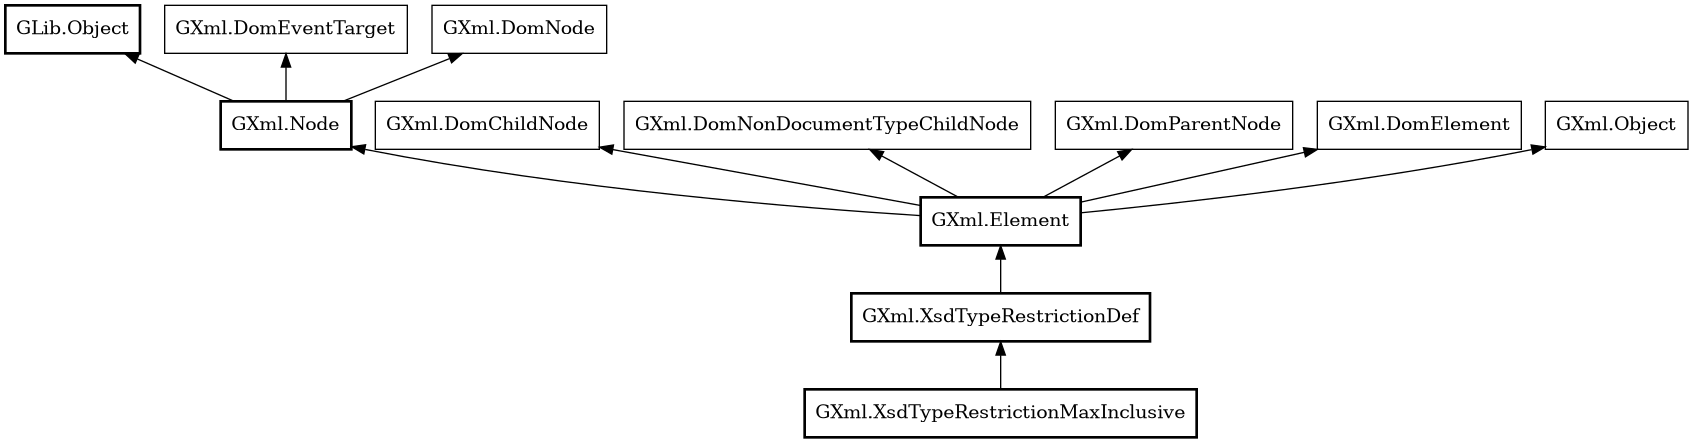 Object hierarchy for XsdTypeRestrictionMaxInclusive